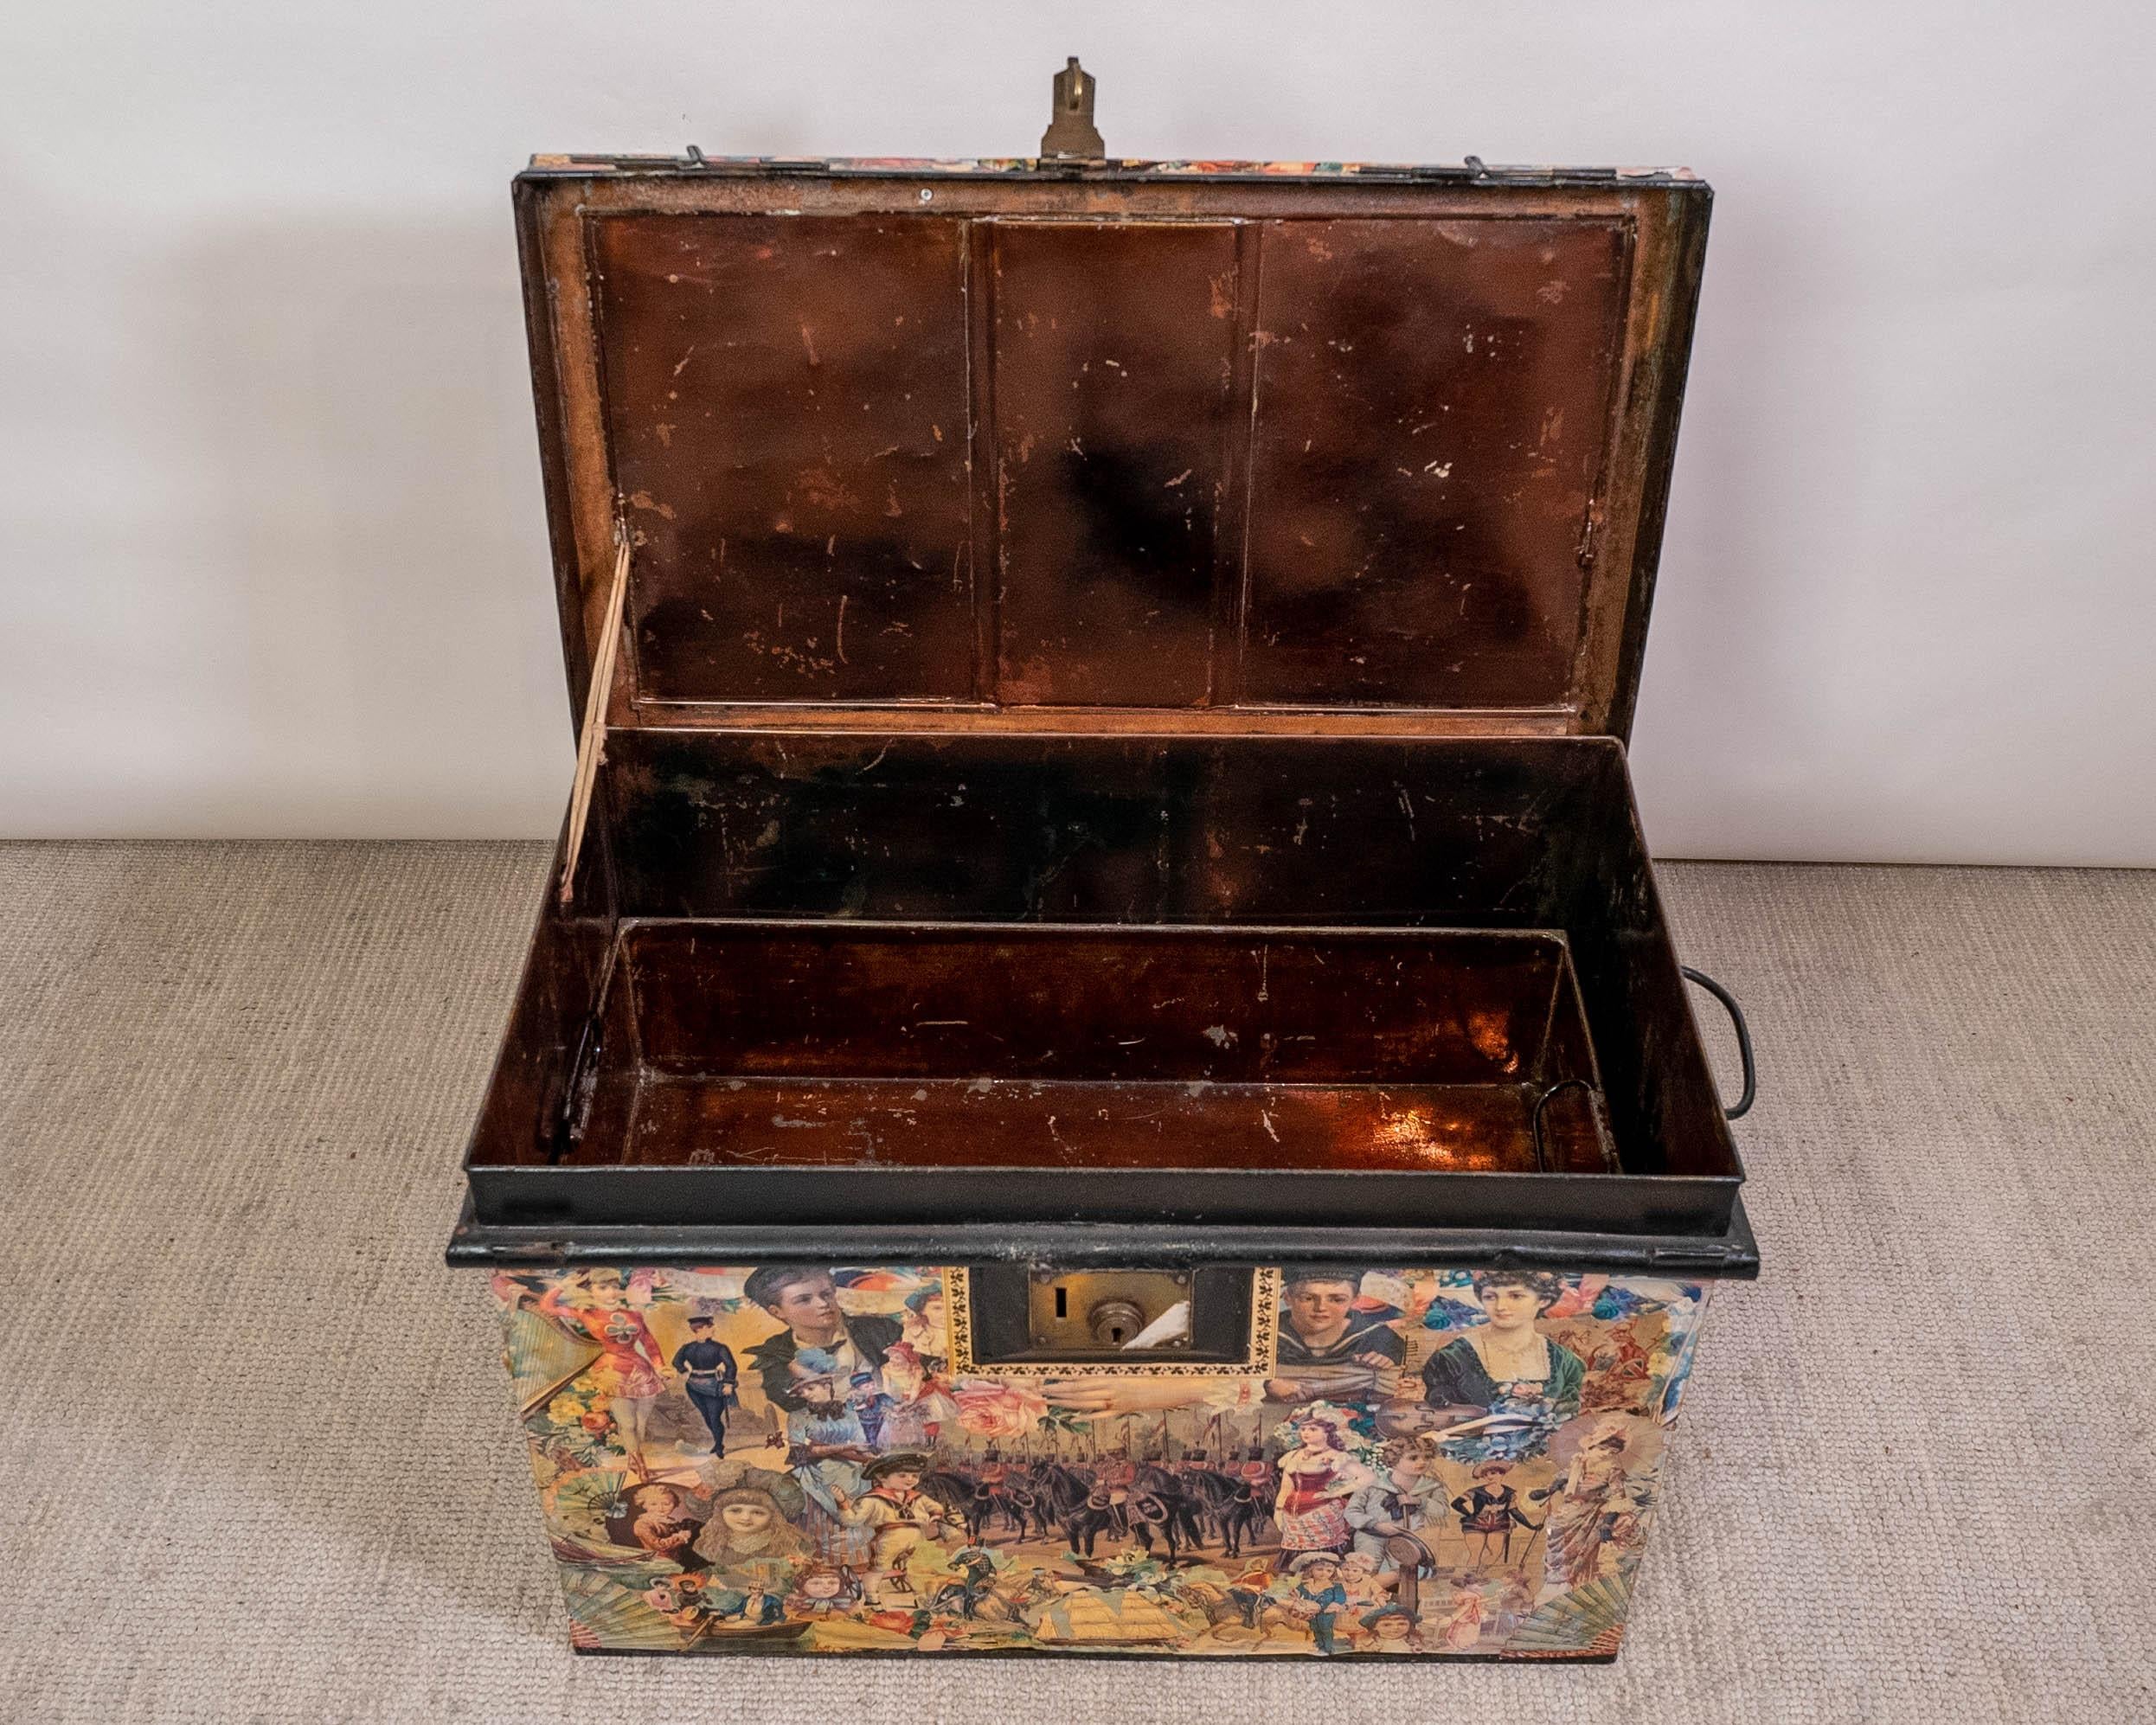 Set of 3 charming hand decoupaged storage chests or trunks with hinged lids, circa 1910. Imagery is an artfully arranged mix of Victoriana including fashionable ladies, flowers, musical instruments, decorative borders and a hunting formation on